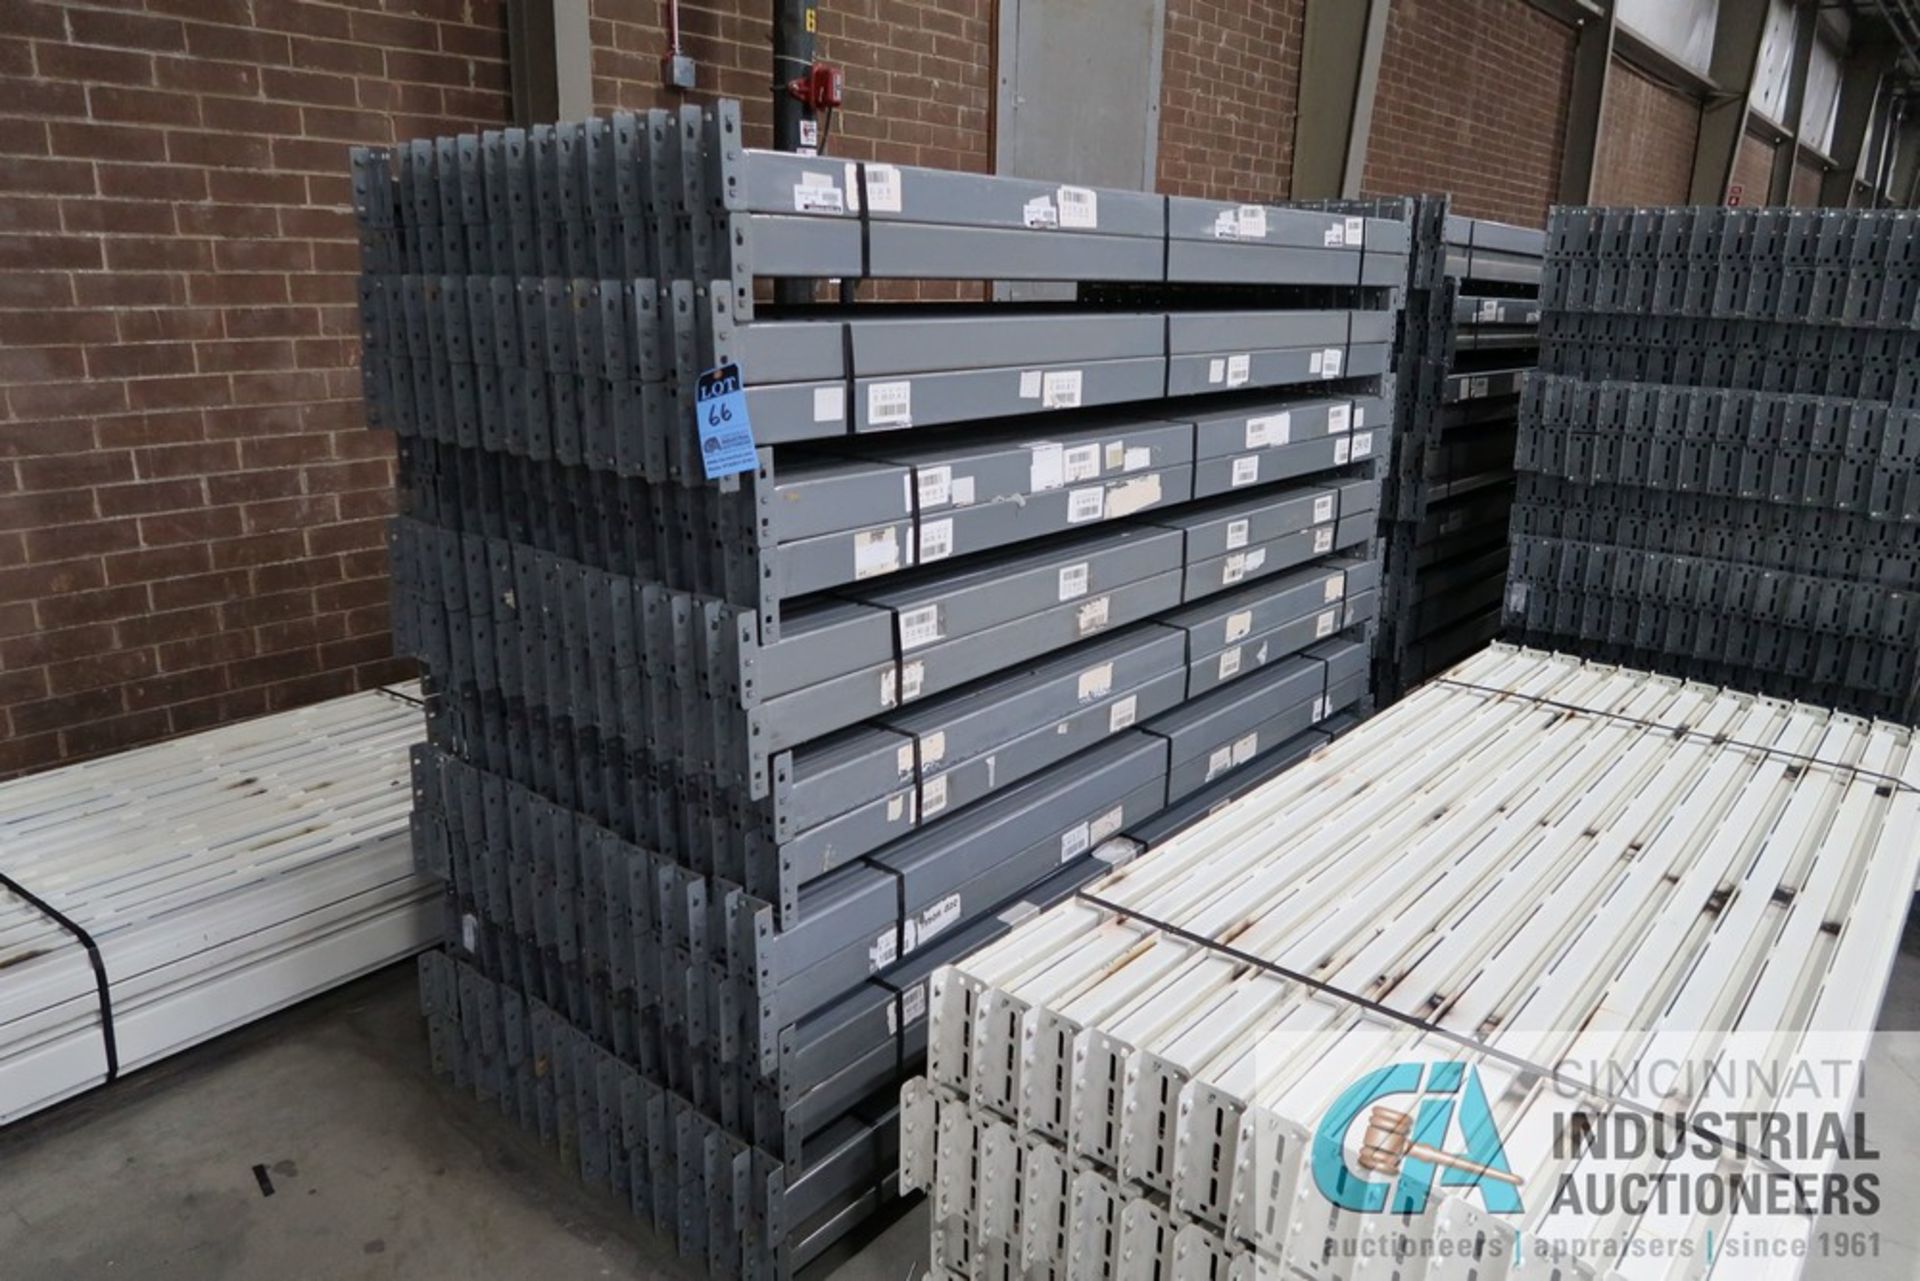 96" X 3.5" TEARDROP PALLET RACK BEAMS - Bid price is per unit multiplied by the quantity **For